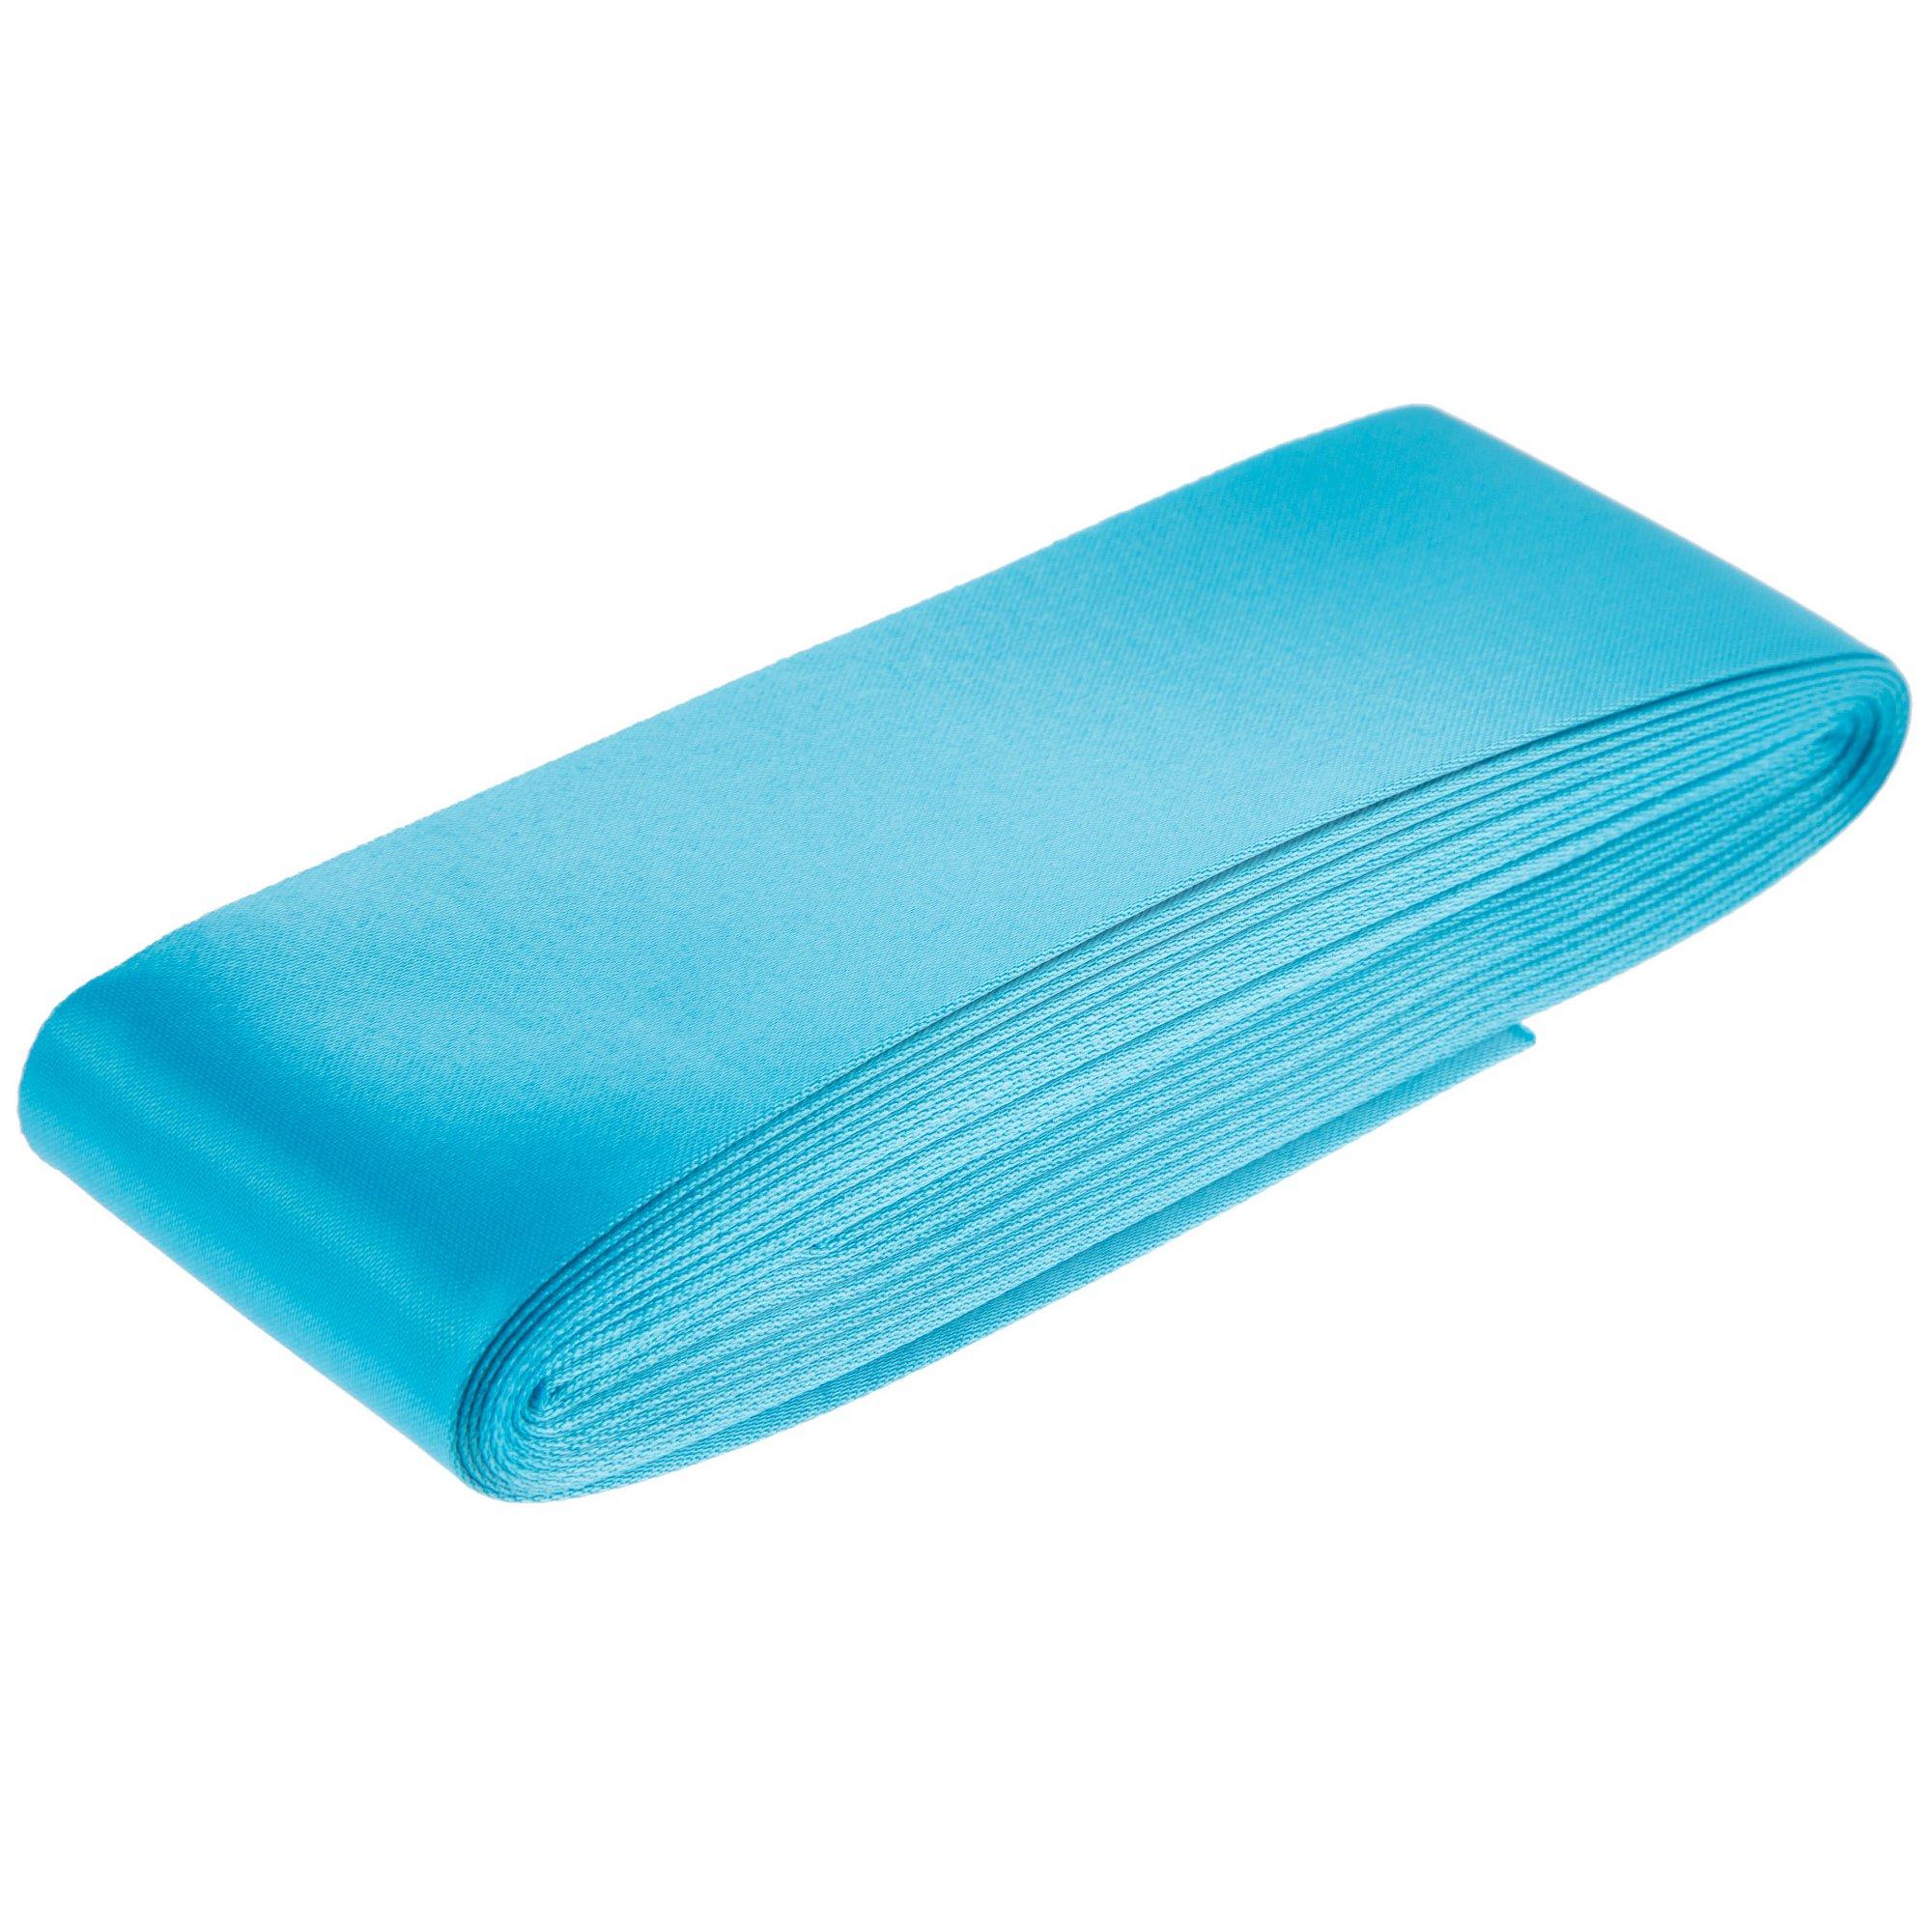  Unknown1 Satin Fleece Blanket Binding Edges Throw Robin Egg Blue  Solid Color Modern Contemporary : Home & Kitchen